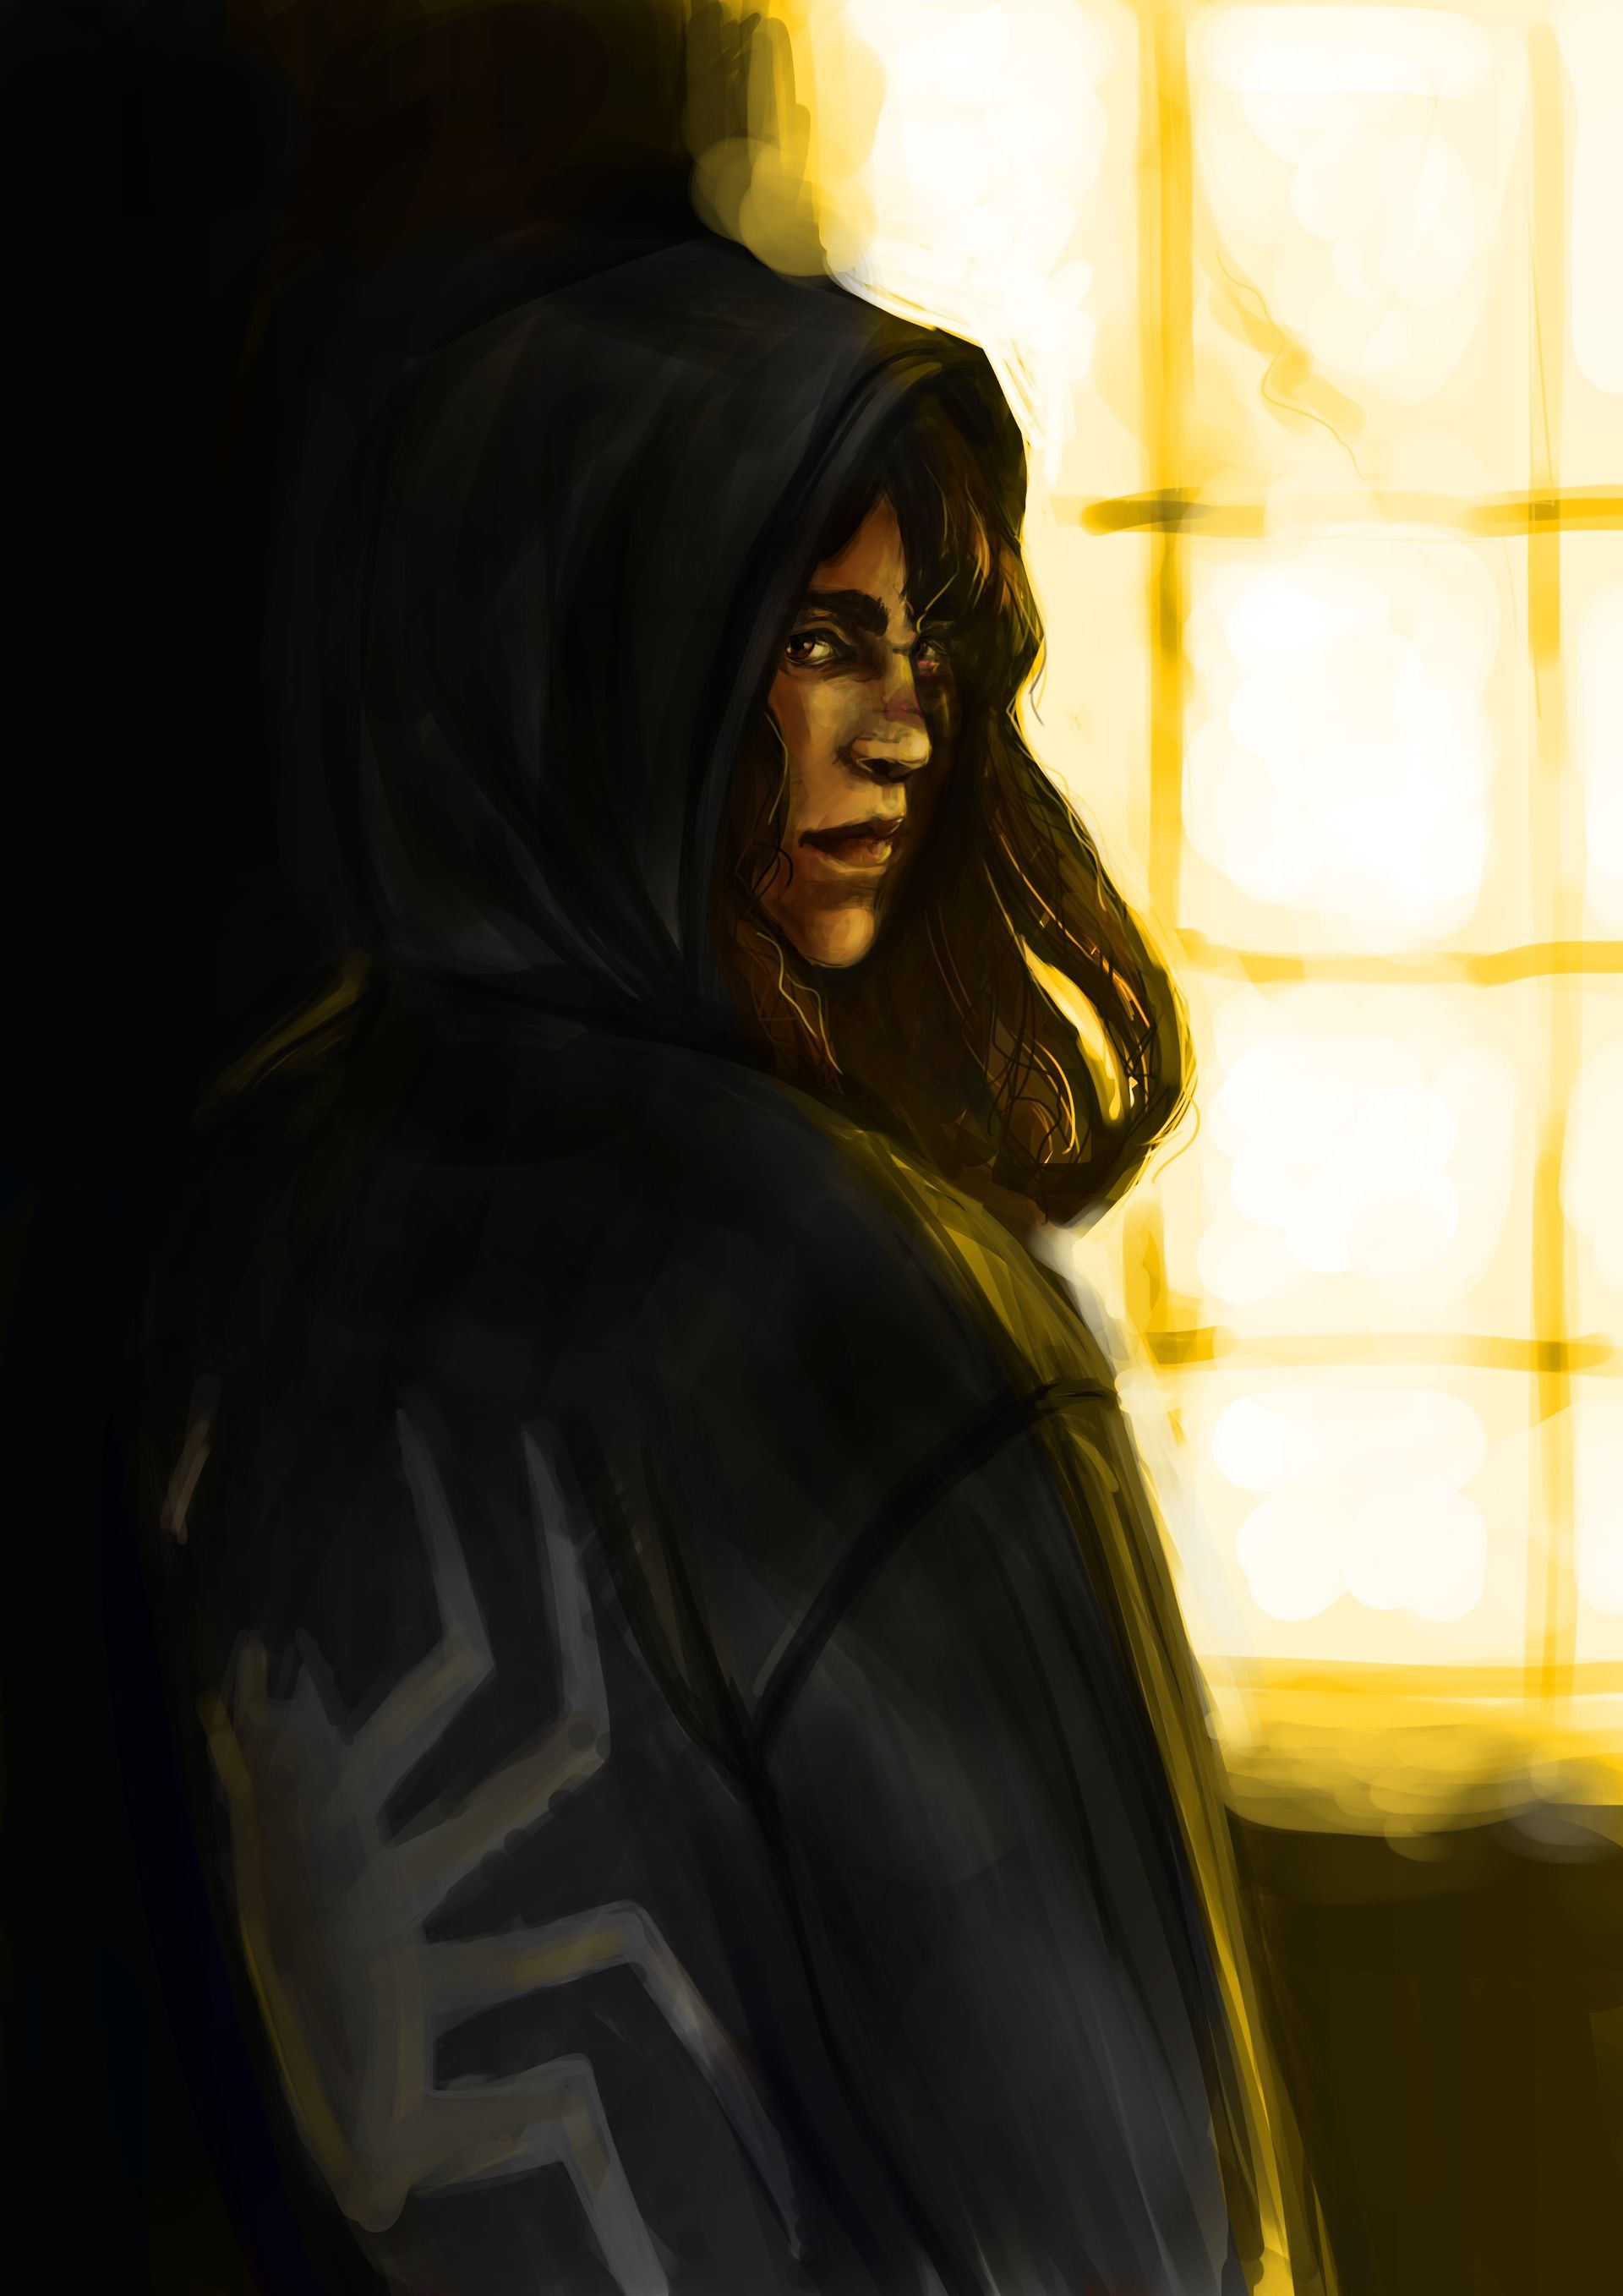 Anya in a hoodie with a spider painted on the back, standing in front of a yellow-tinted window.